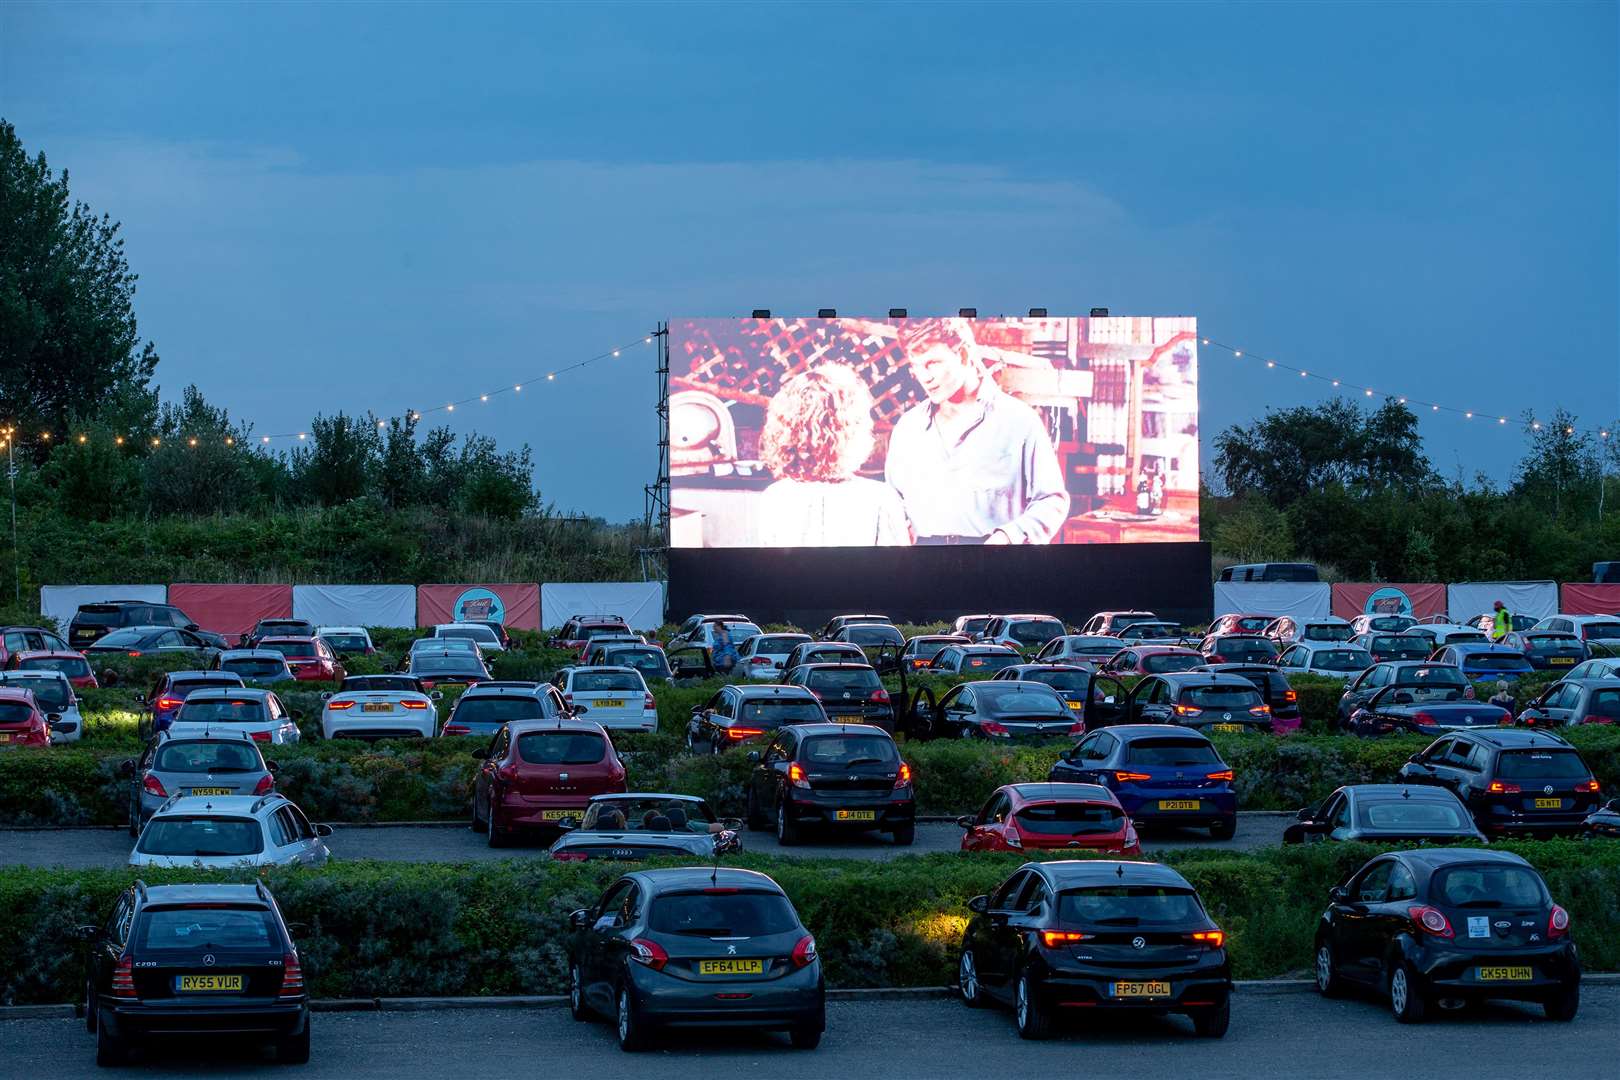 An open-air cinema run by Kent Drive-In Cinema at Betteshanger Country Park earlier this year. Picture: Matt Bristow/Kent Drive-In Cinema